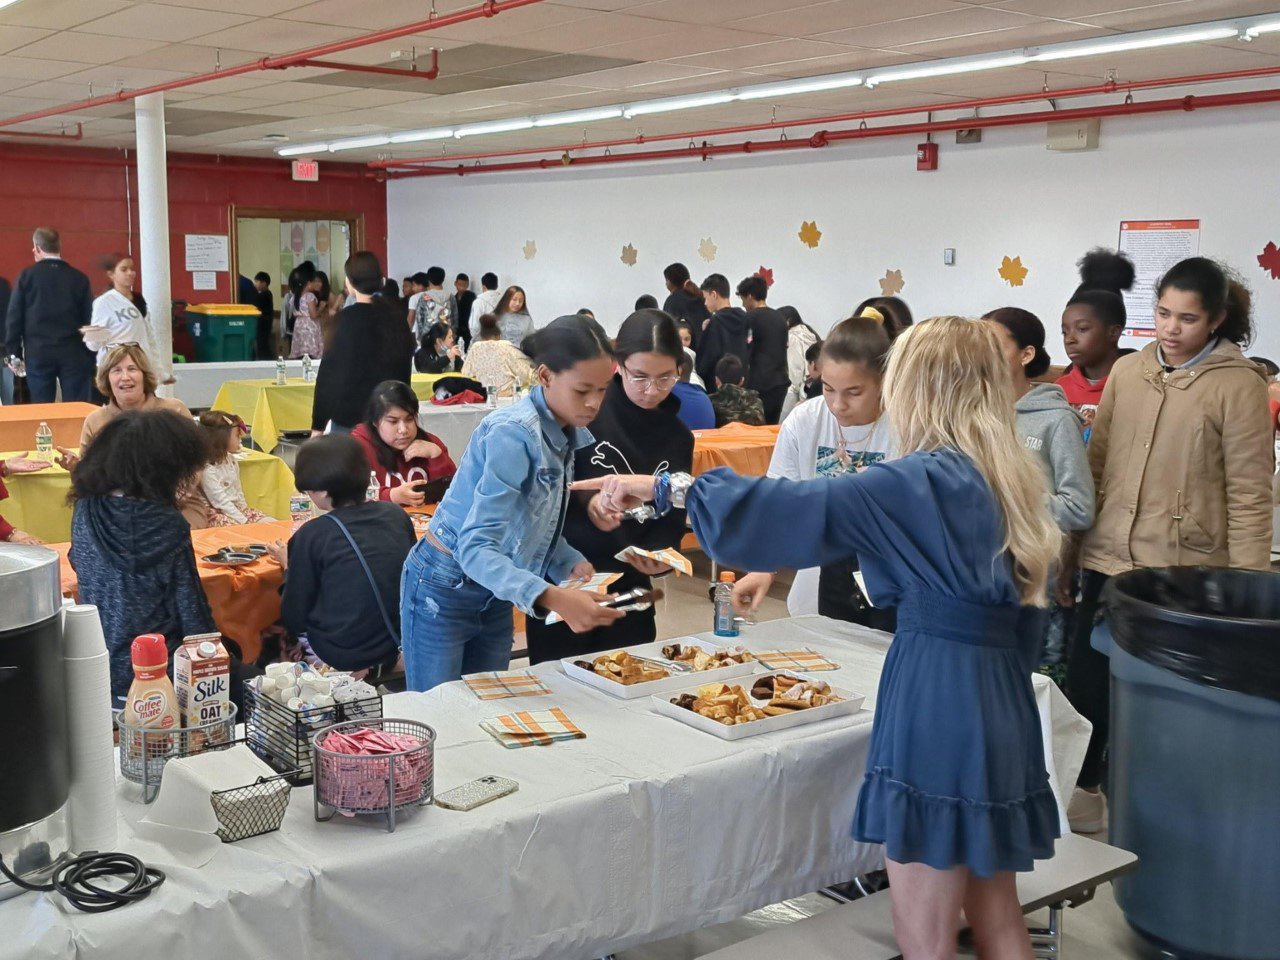 TIME TO CELEBRATE: Students gather in the school cafeteria for their Thanksgiving celebration that included turkey, side dishes and -- of course -- dessert.